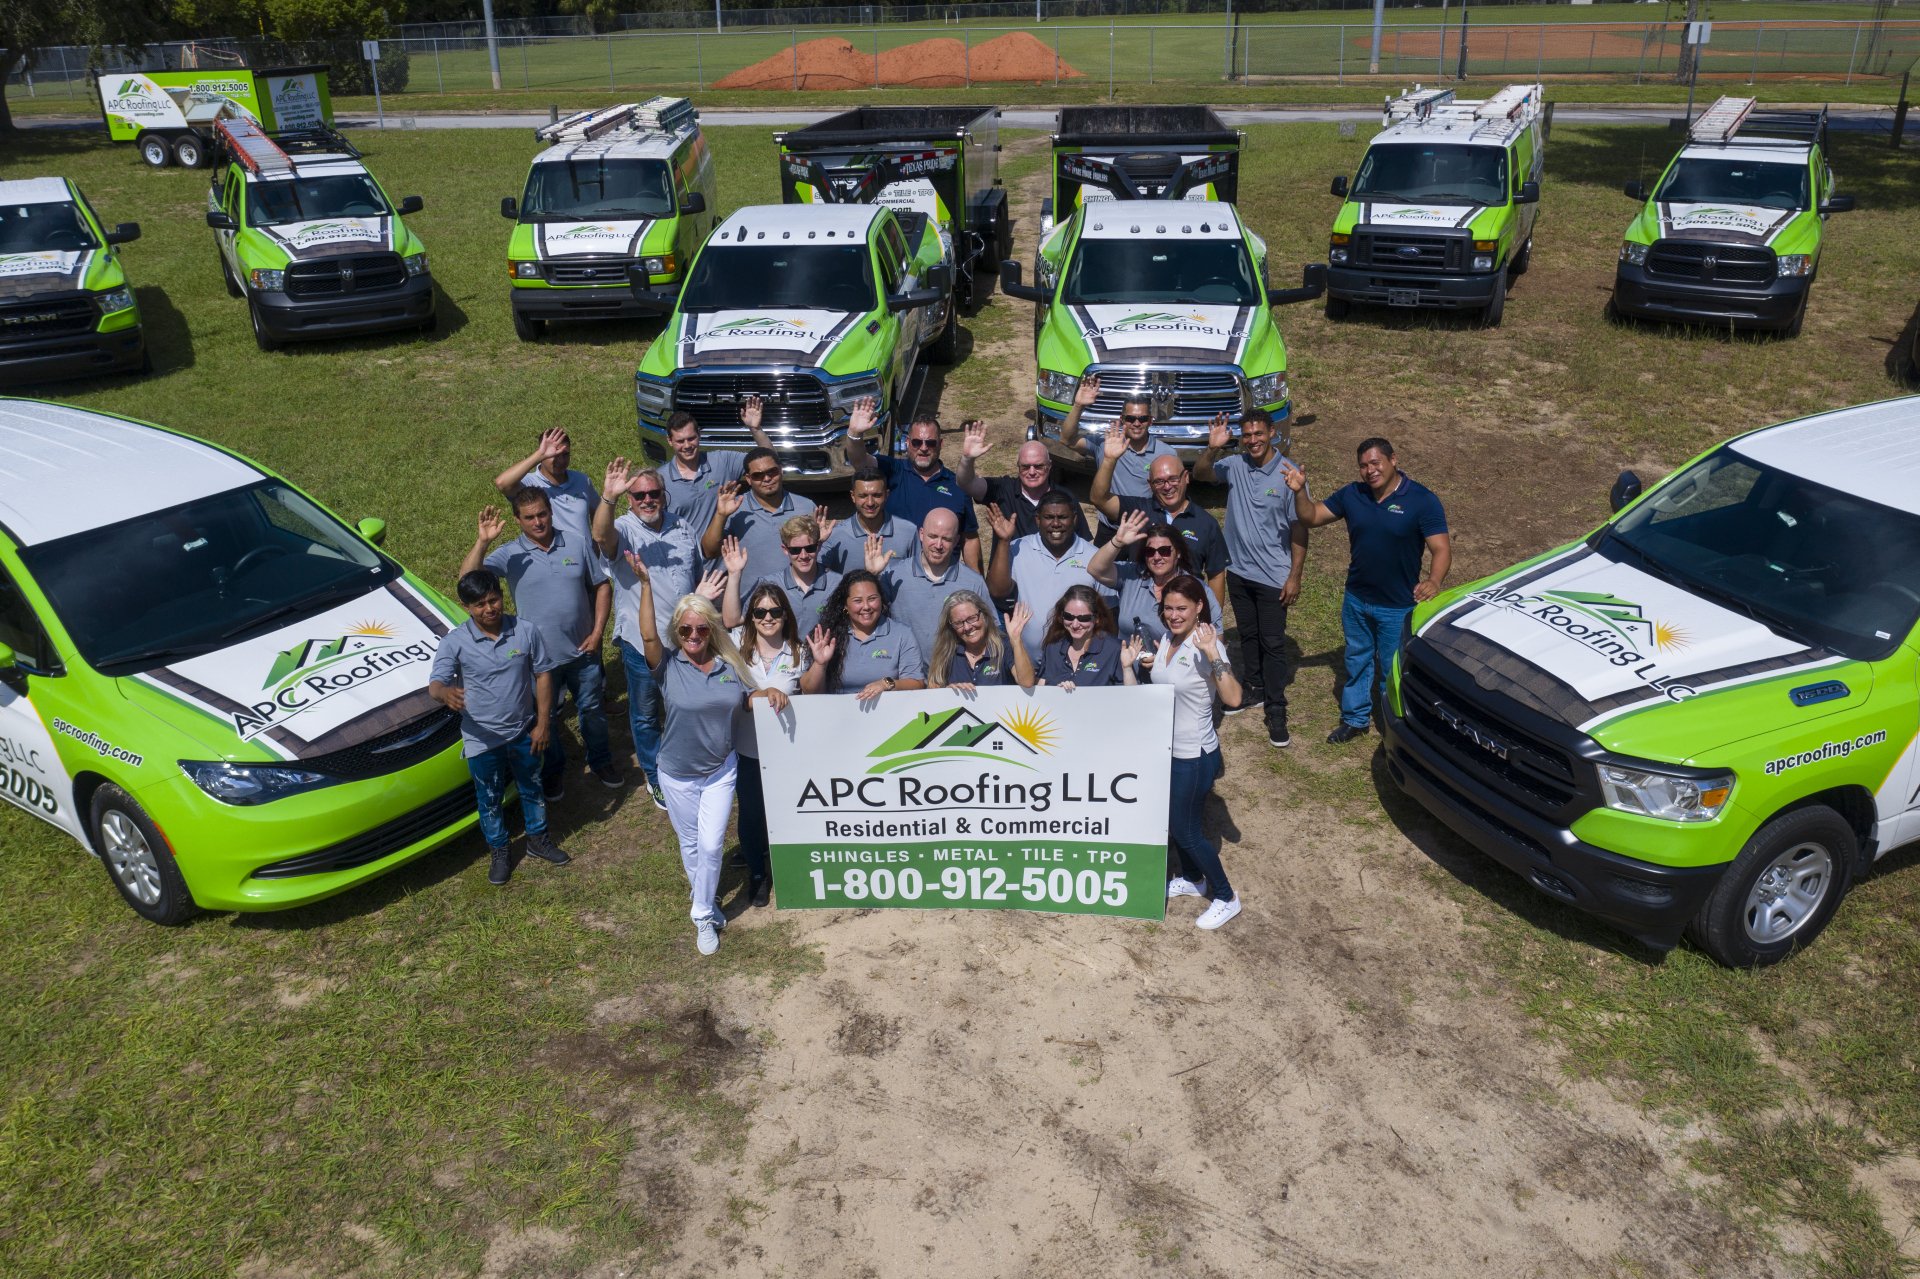 APC Roofing in Clermont, FL - Picture of Staff and Vehicles